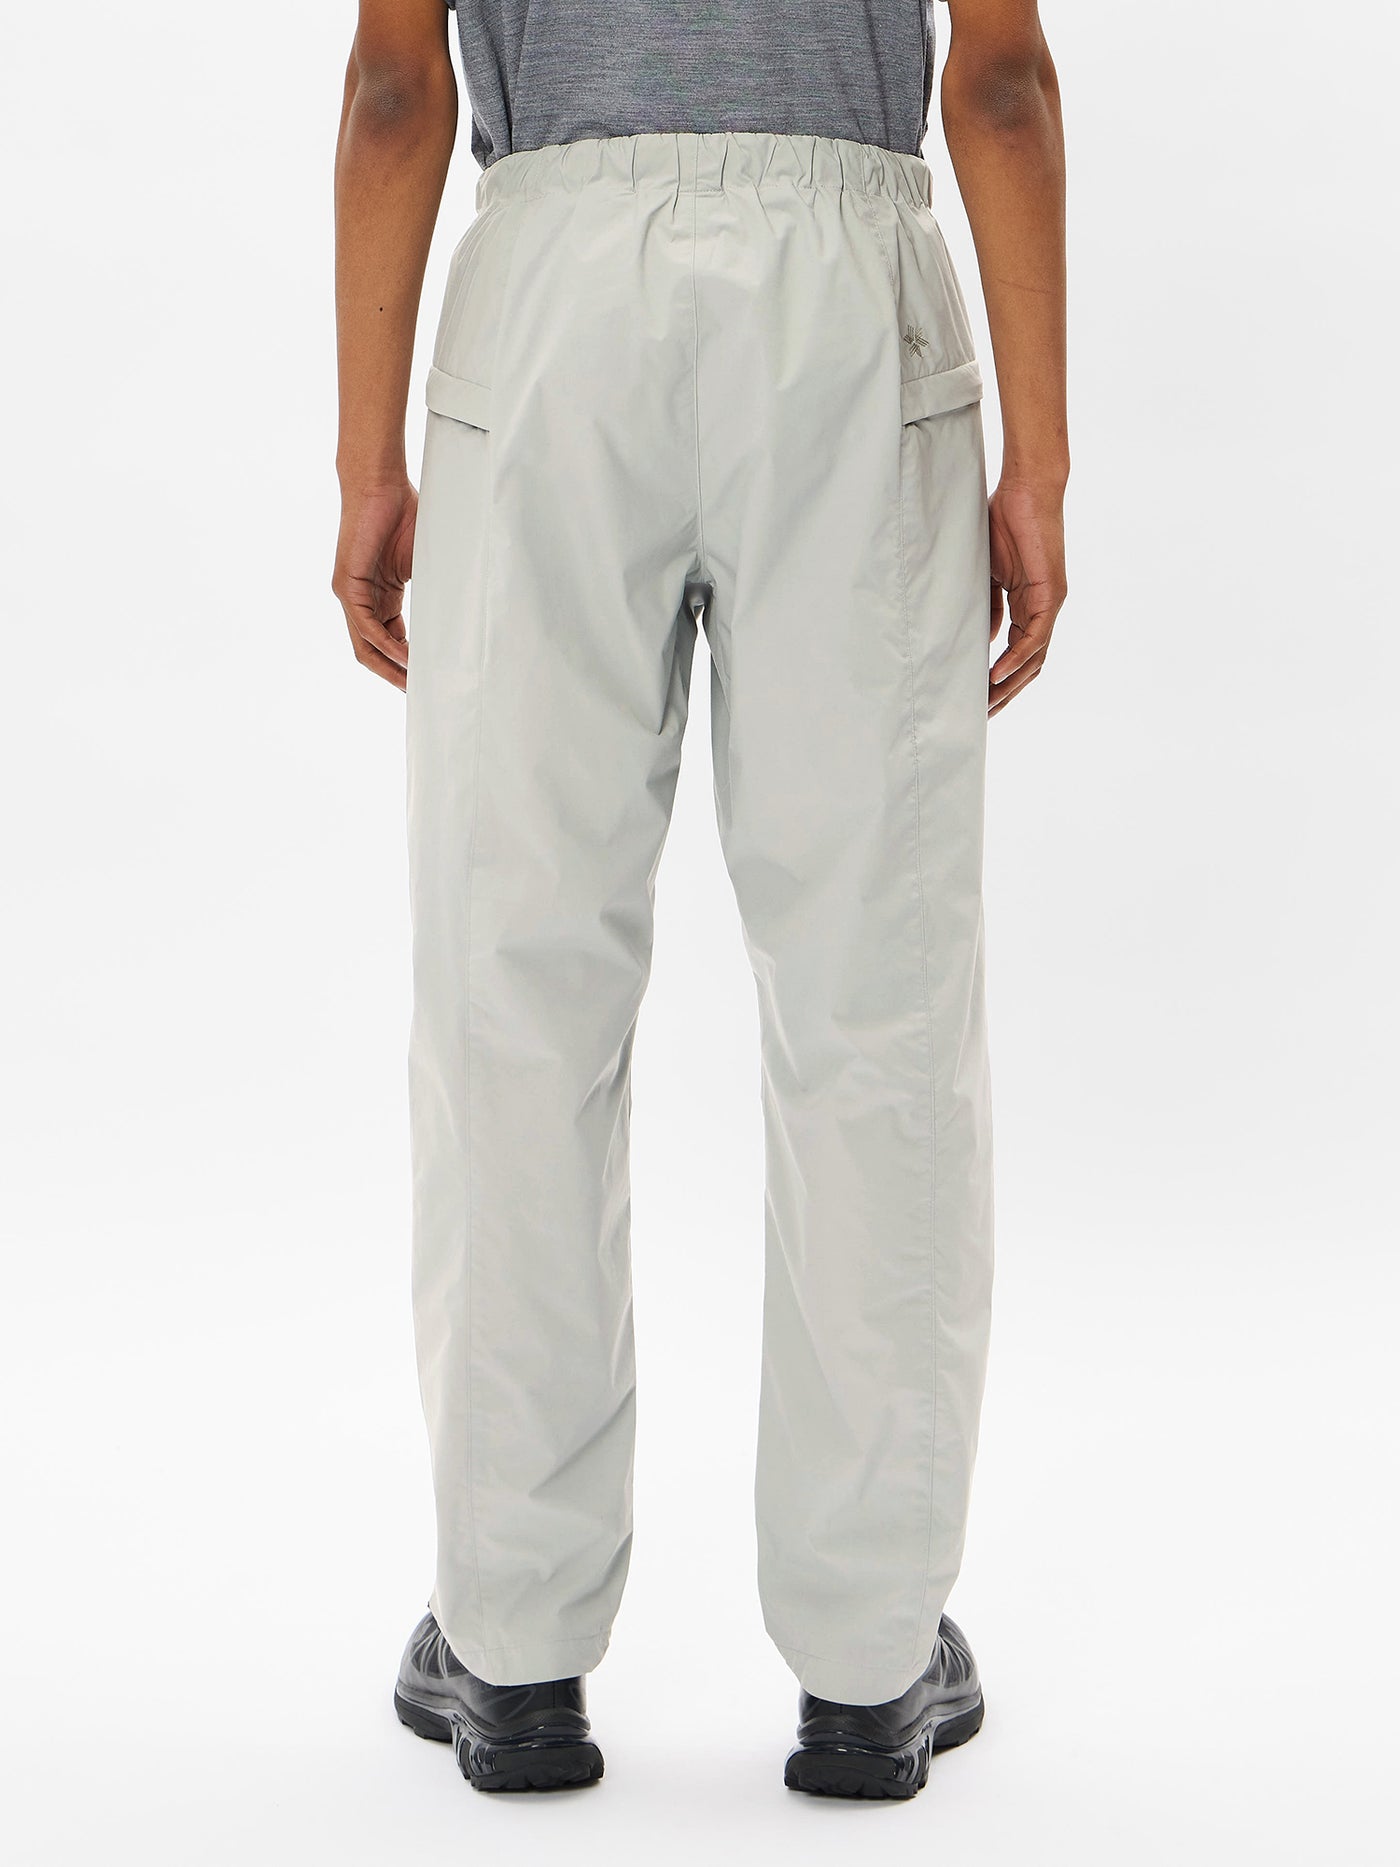 All Direction Stretch Tapered Pants